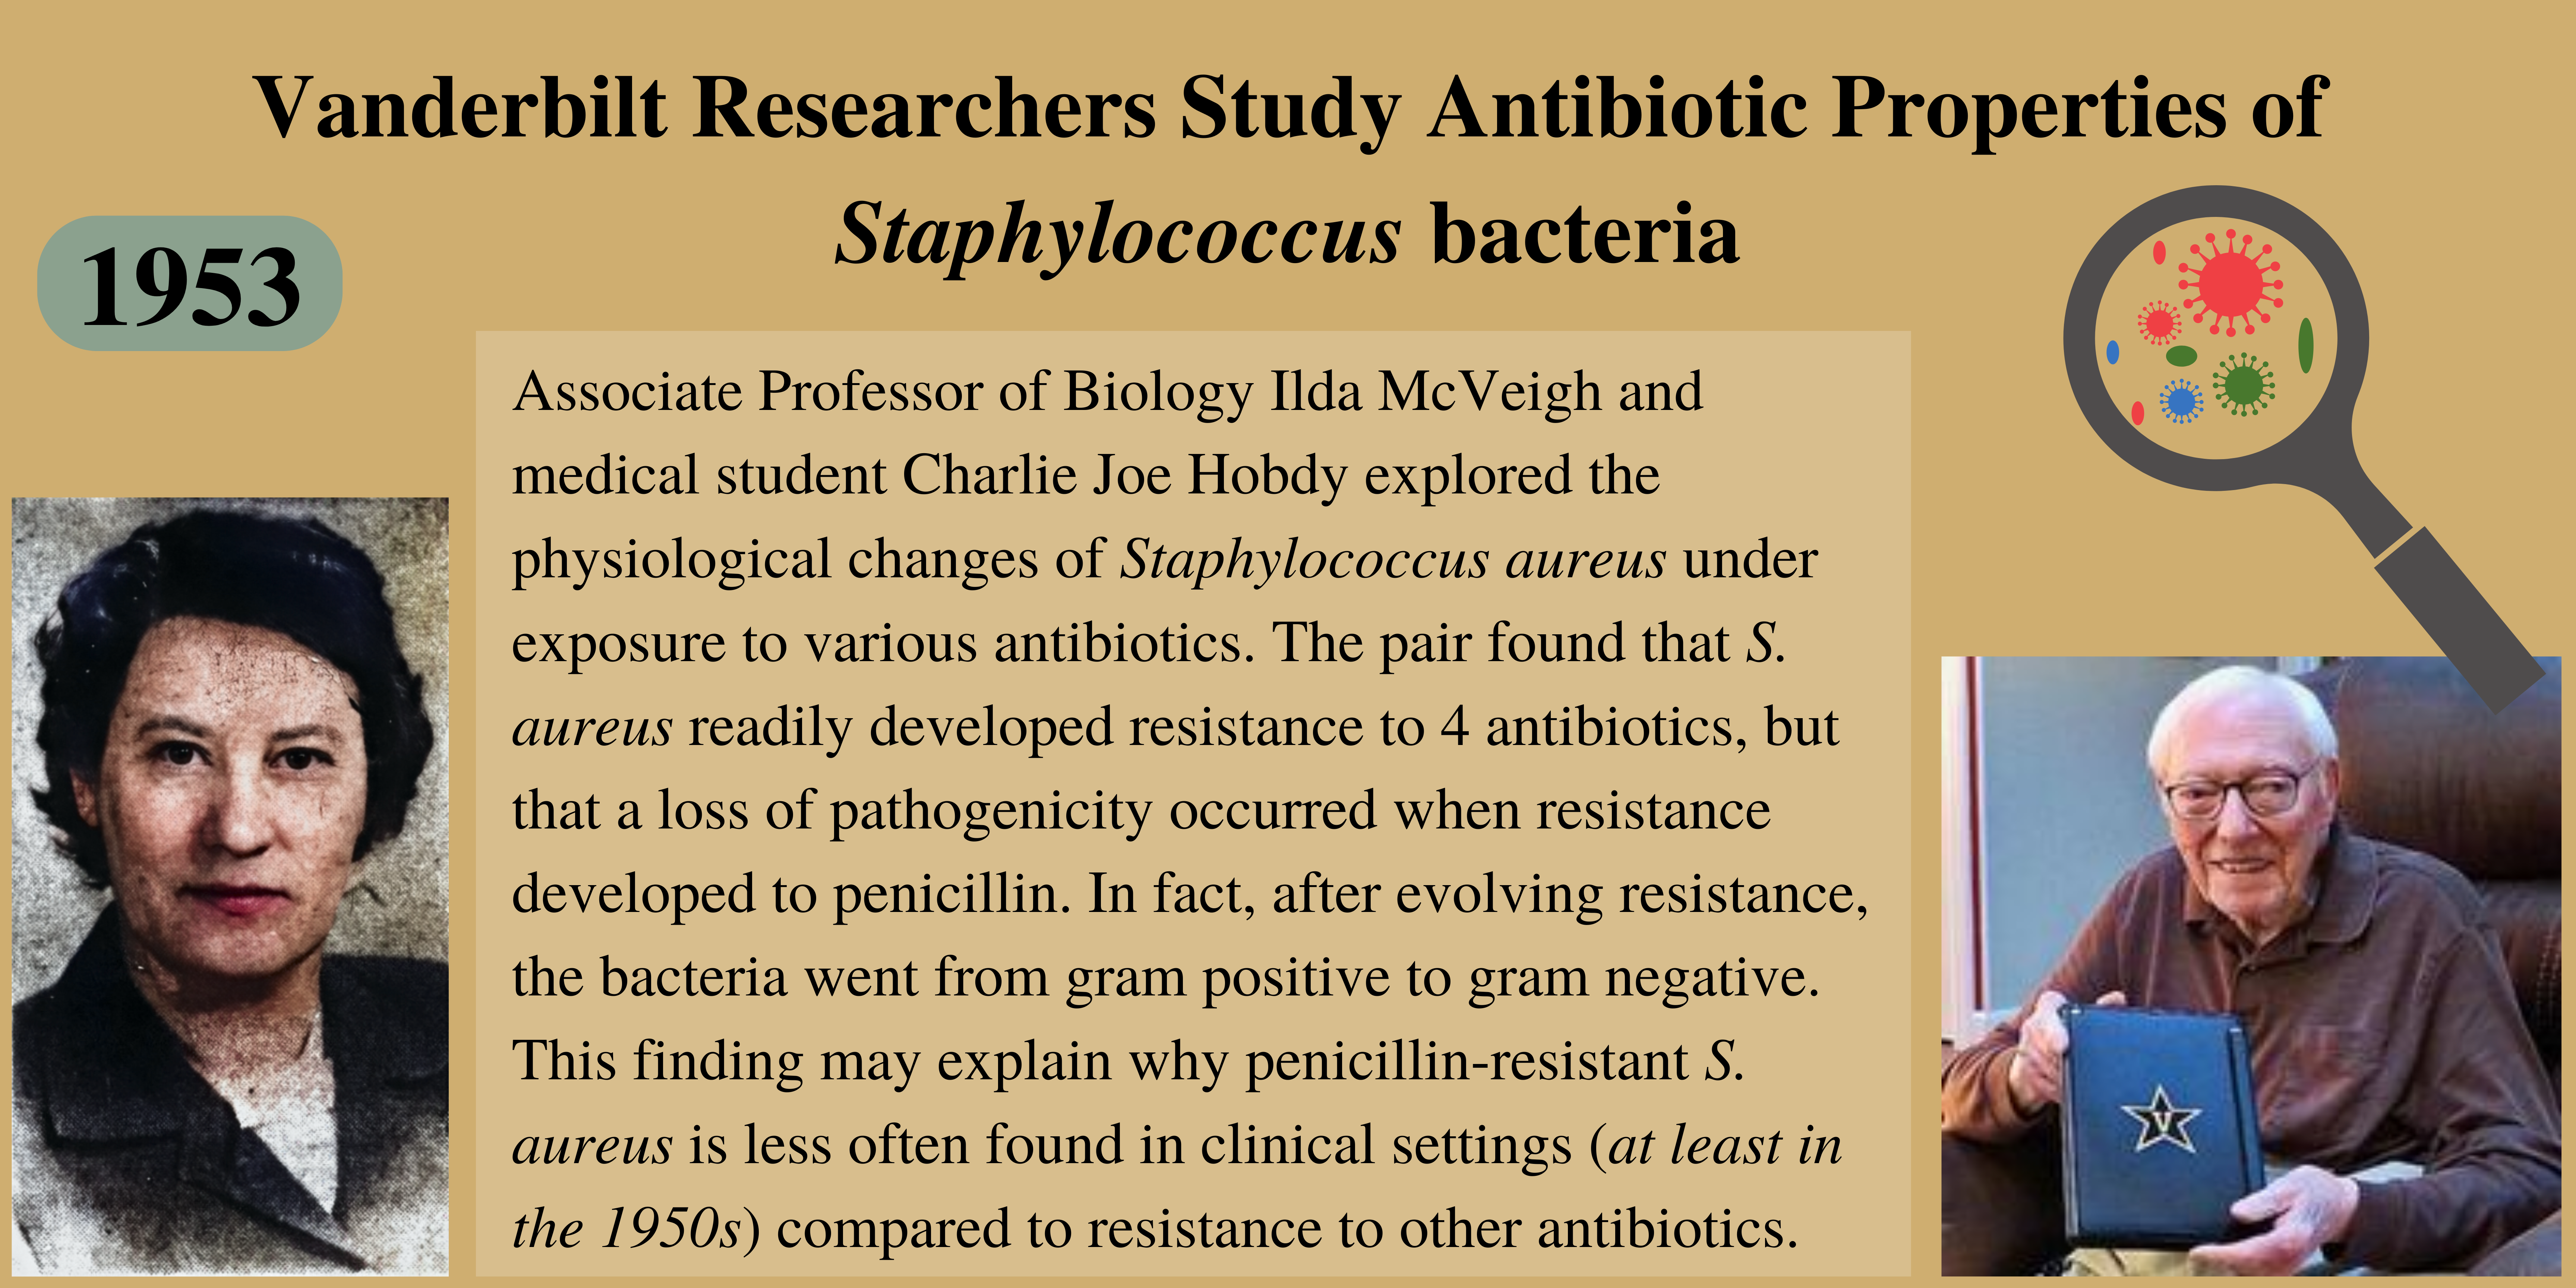 A press release of Ilda McVeigh's work from the 1950s with the late Charlie Joe Hobdy, a medical student at the time. They studied antibiotic resistance of Staphylococcus aureus.